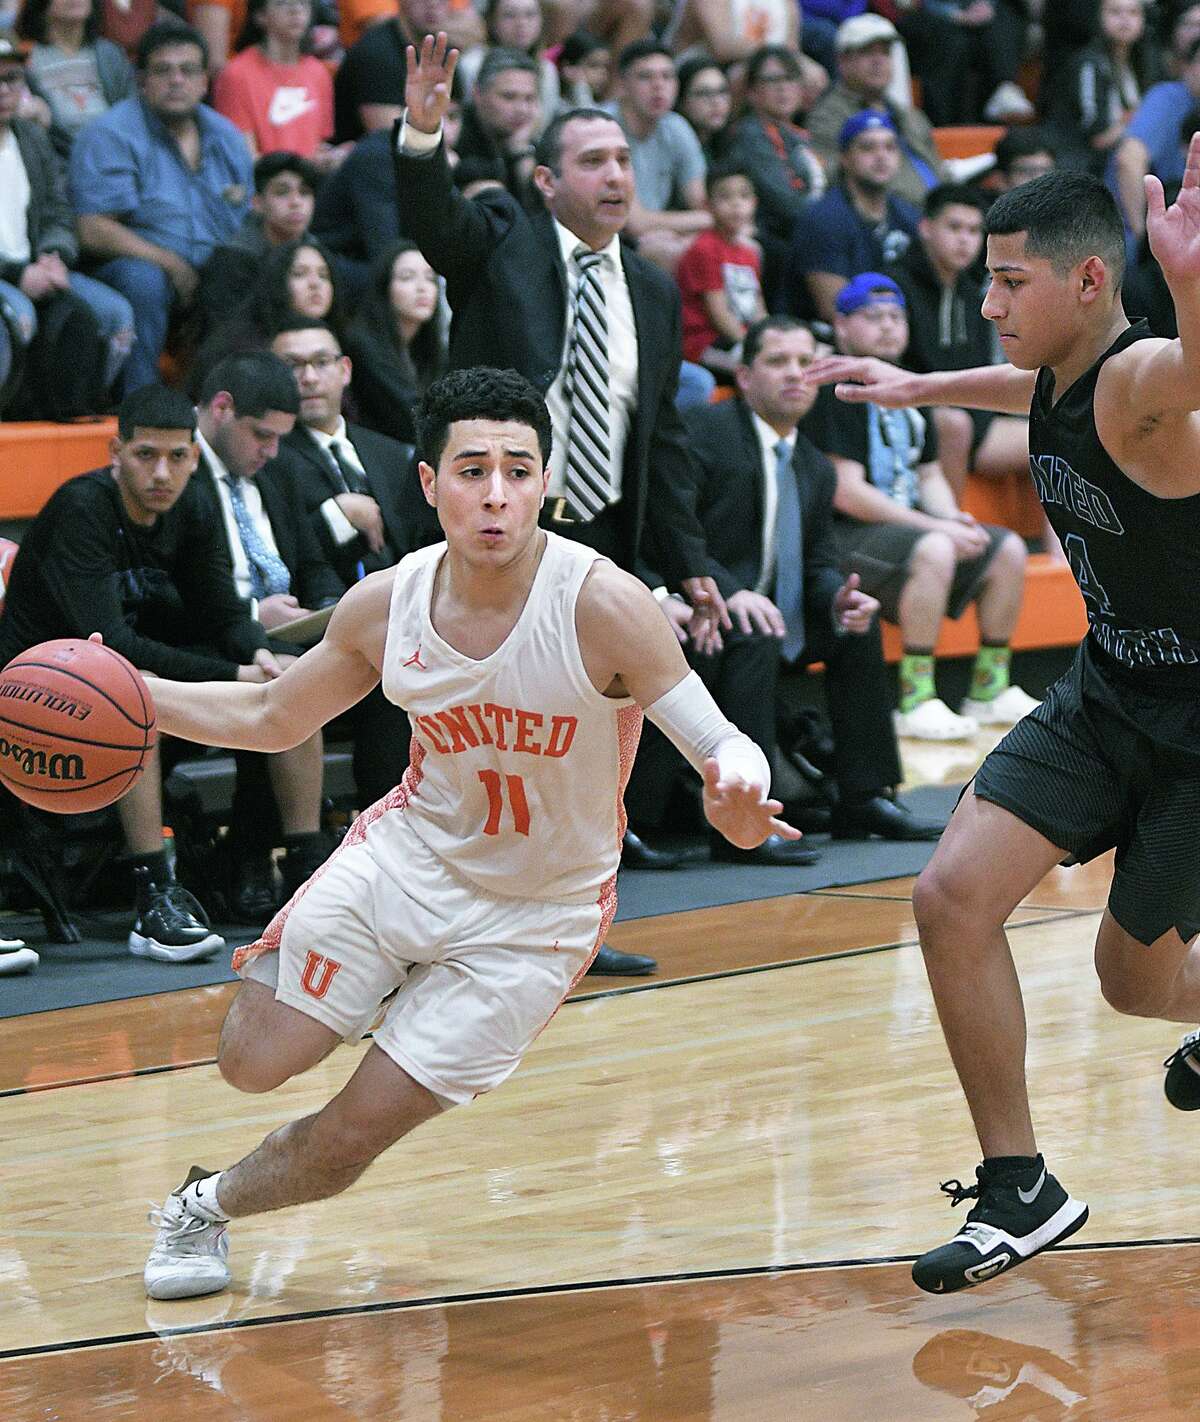 Alex Idrogo controls the ball for the United Longhorns as Jacob Treviño defends for the United South Panthers Tuesday, January 14, 2020 at the United High School Gym.